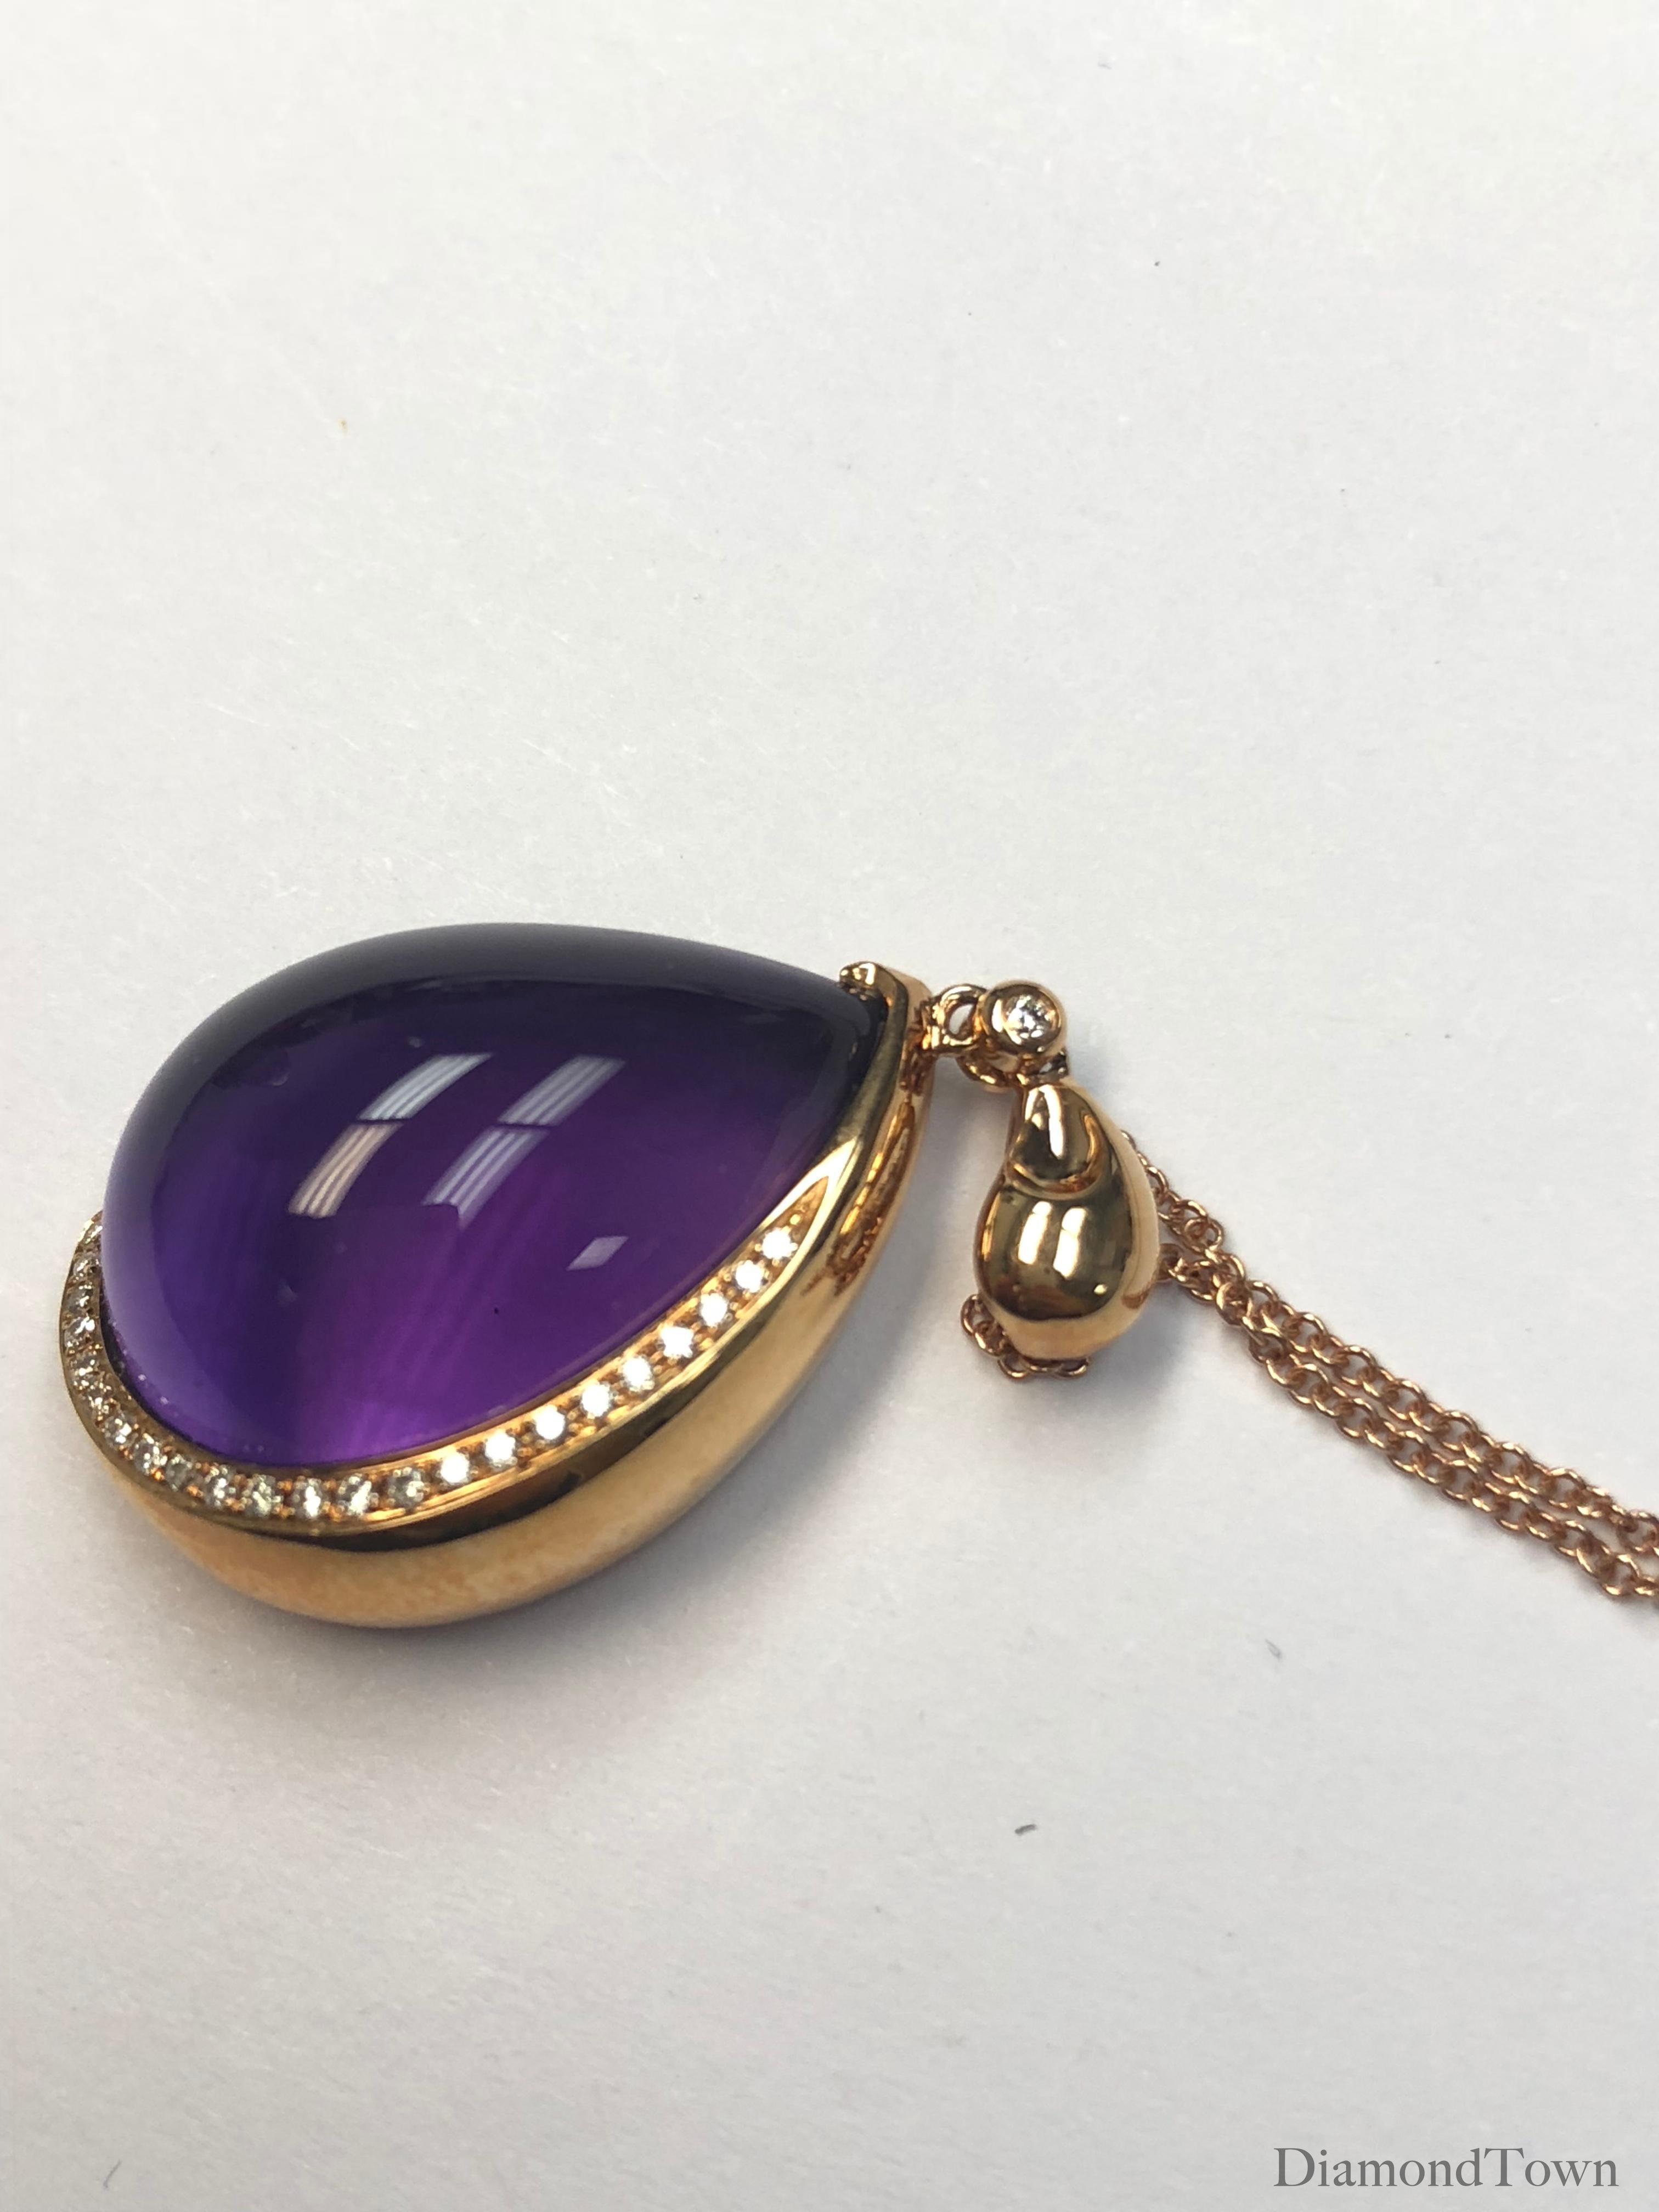 18.80 carat cabochon Amethyst pendant in 18k Rose Gold, with 0.08 carat diamond accent.